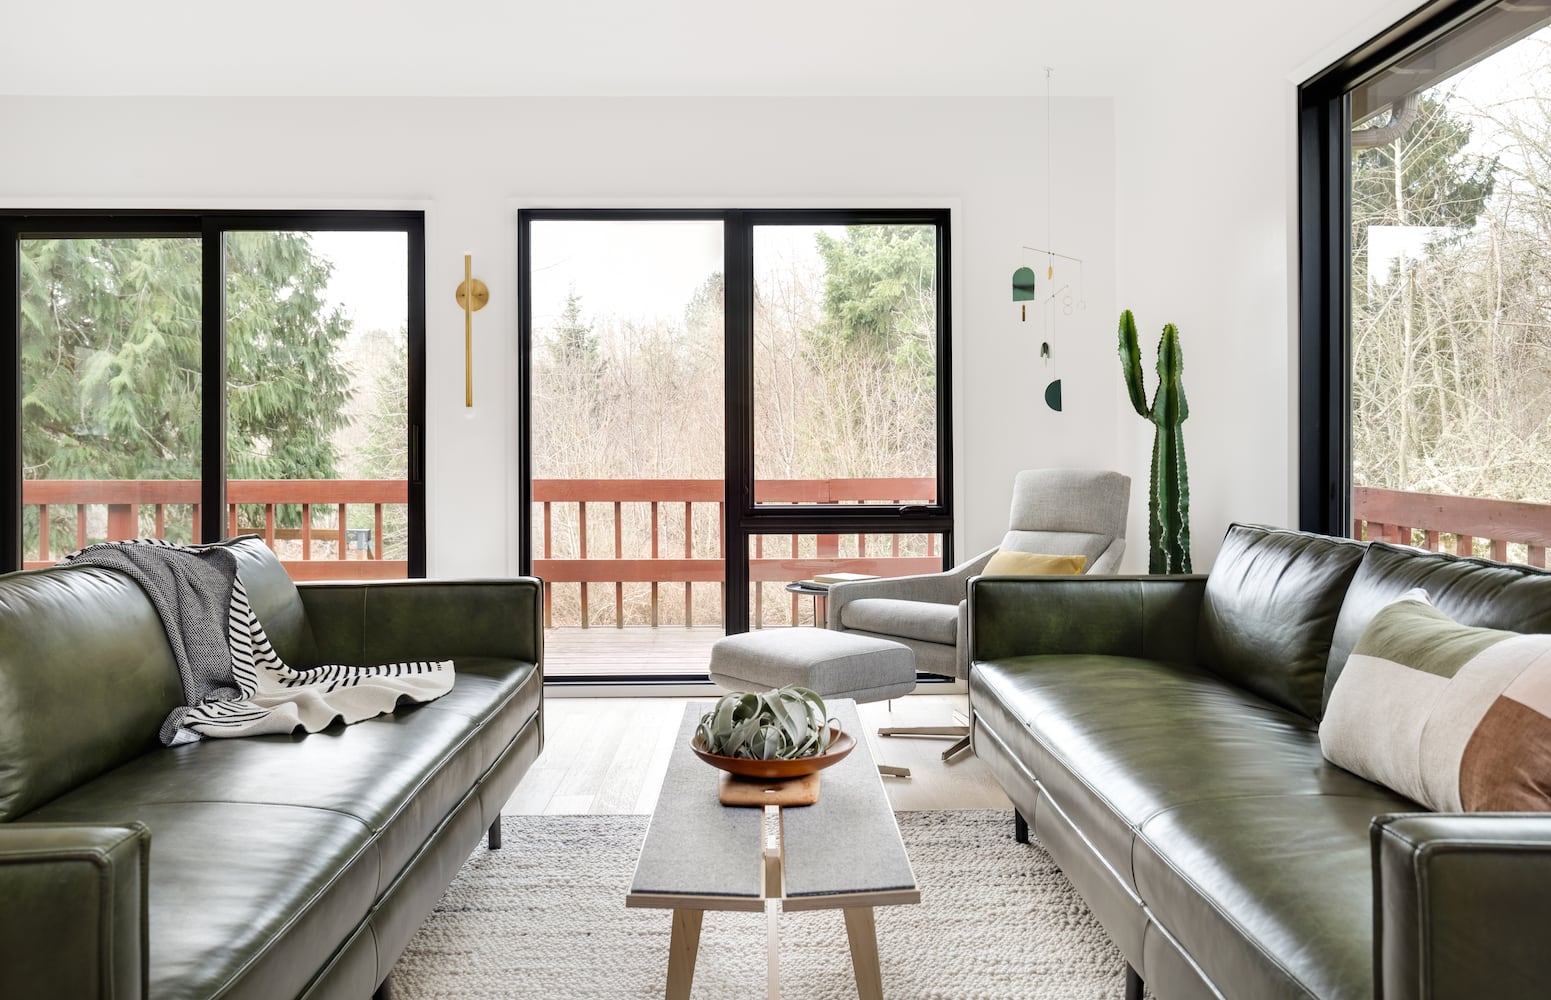 Portland, Oregon modern house living room with green leather sofas and view of trees